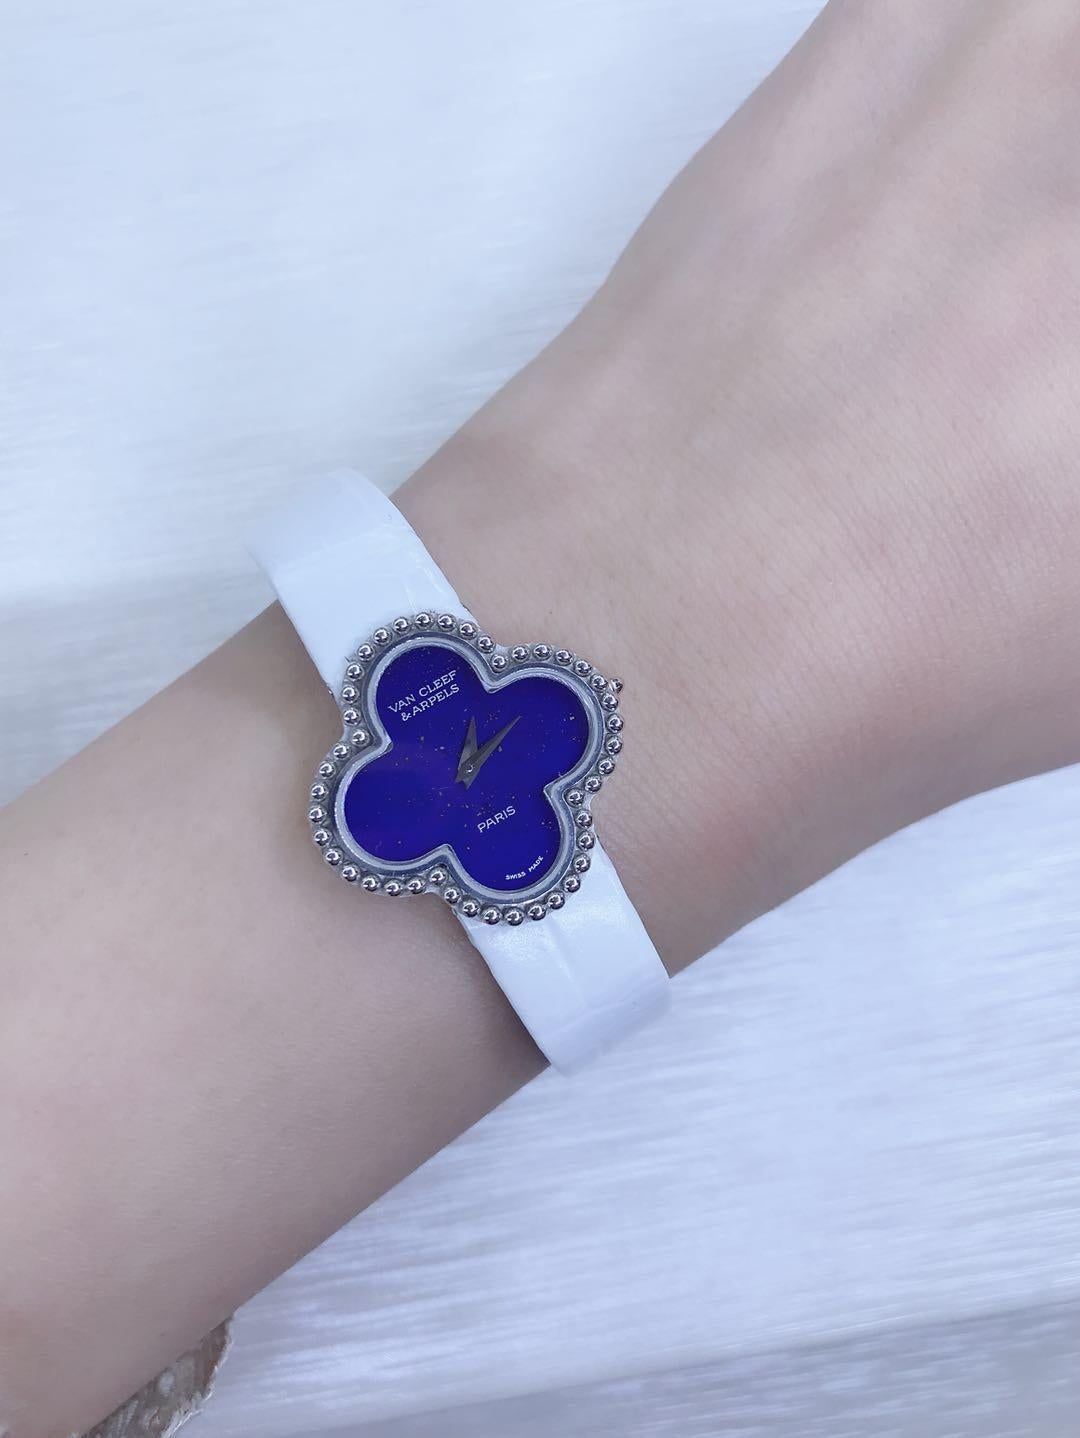 Van Cleef & Arpels Alhambra Small Model White Gold Lapis Watch For Sale 3